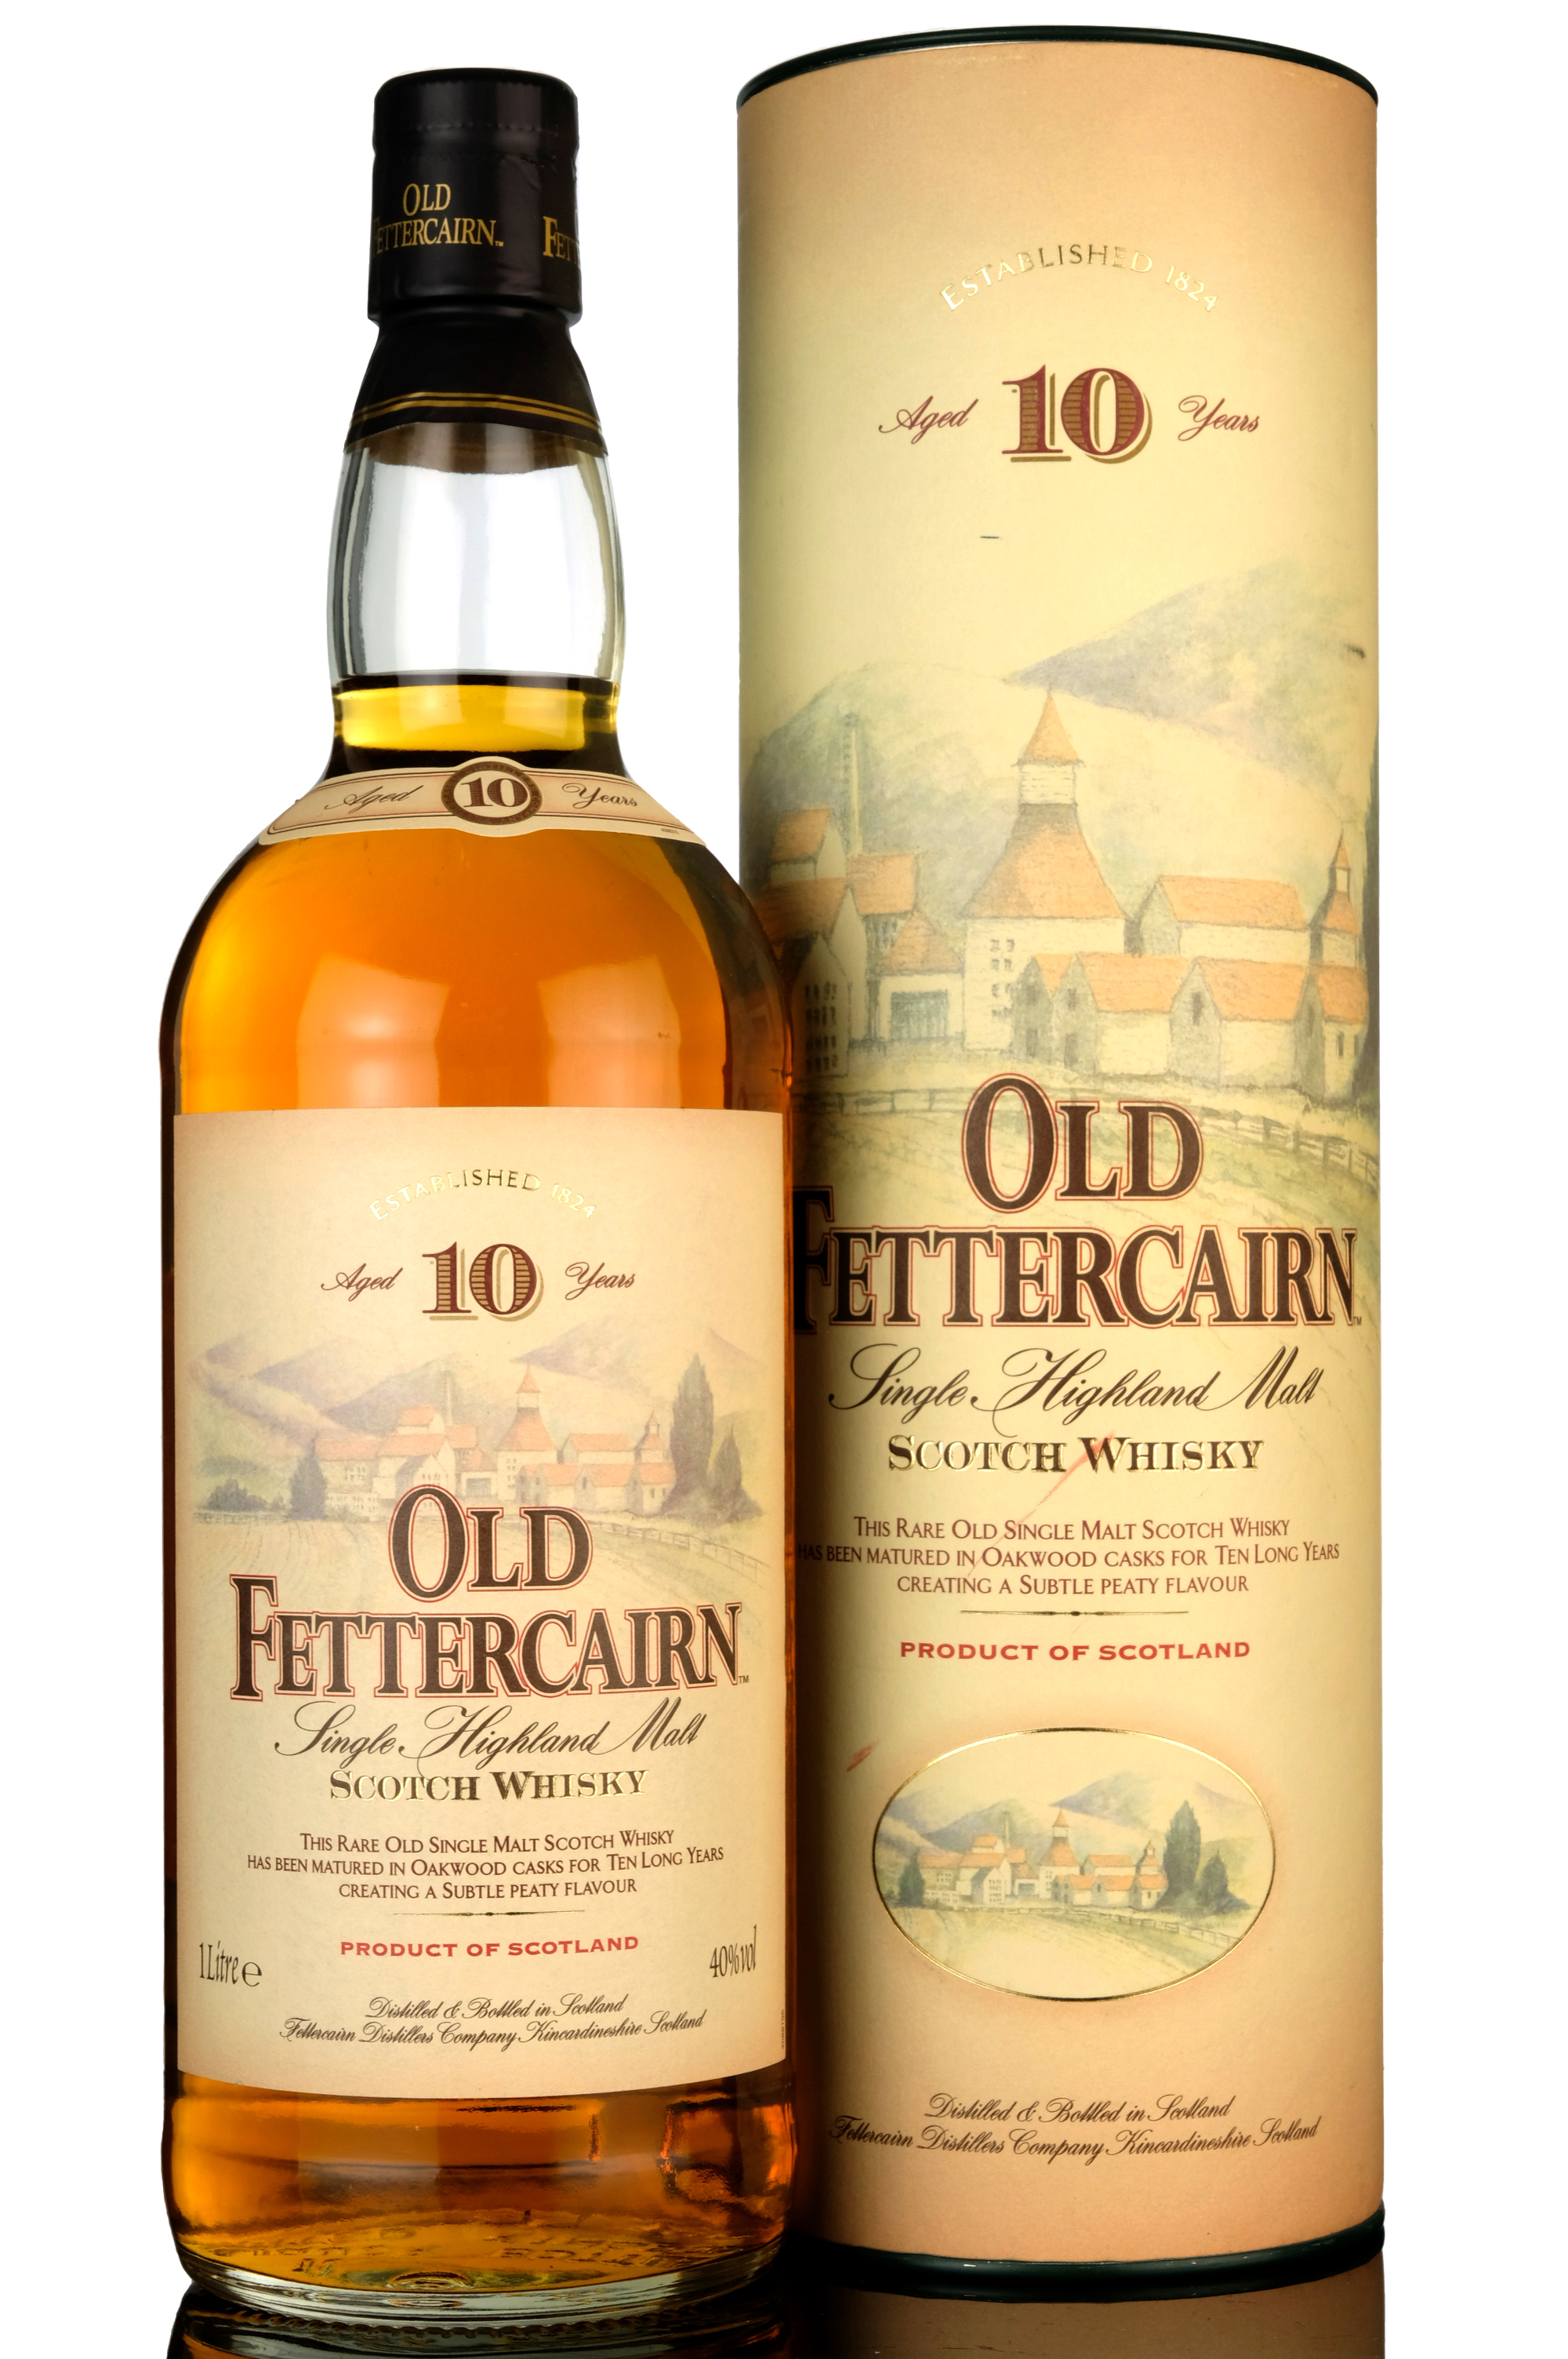 Old Fettercairn 10 Year Old - Circa 2000 - 1 Litre